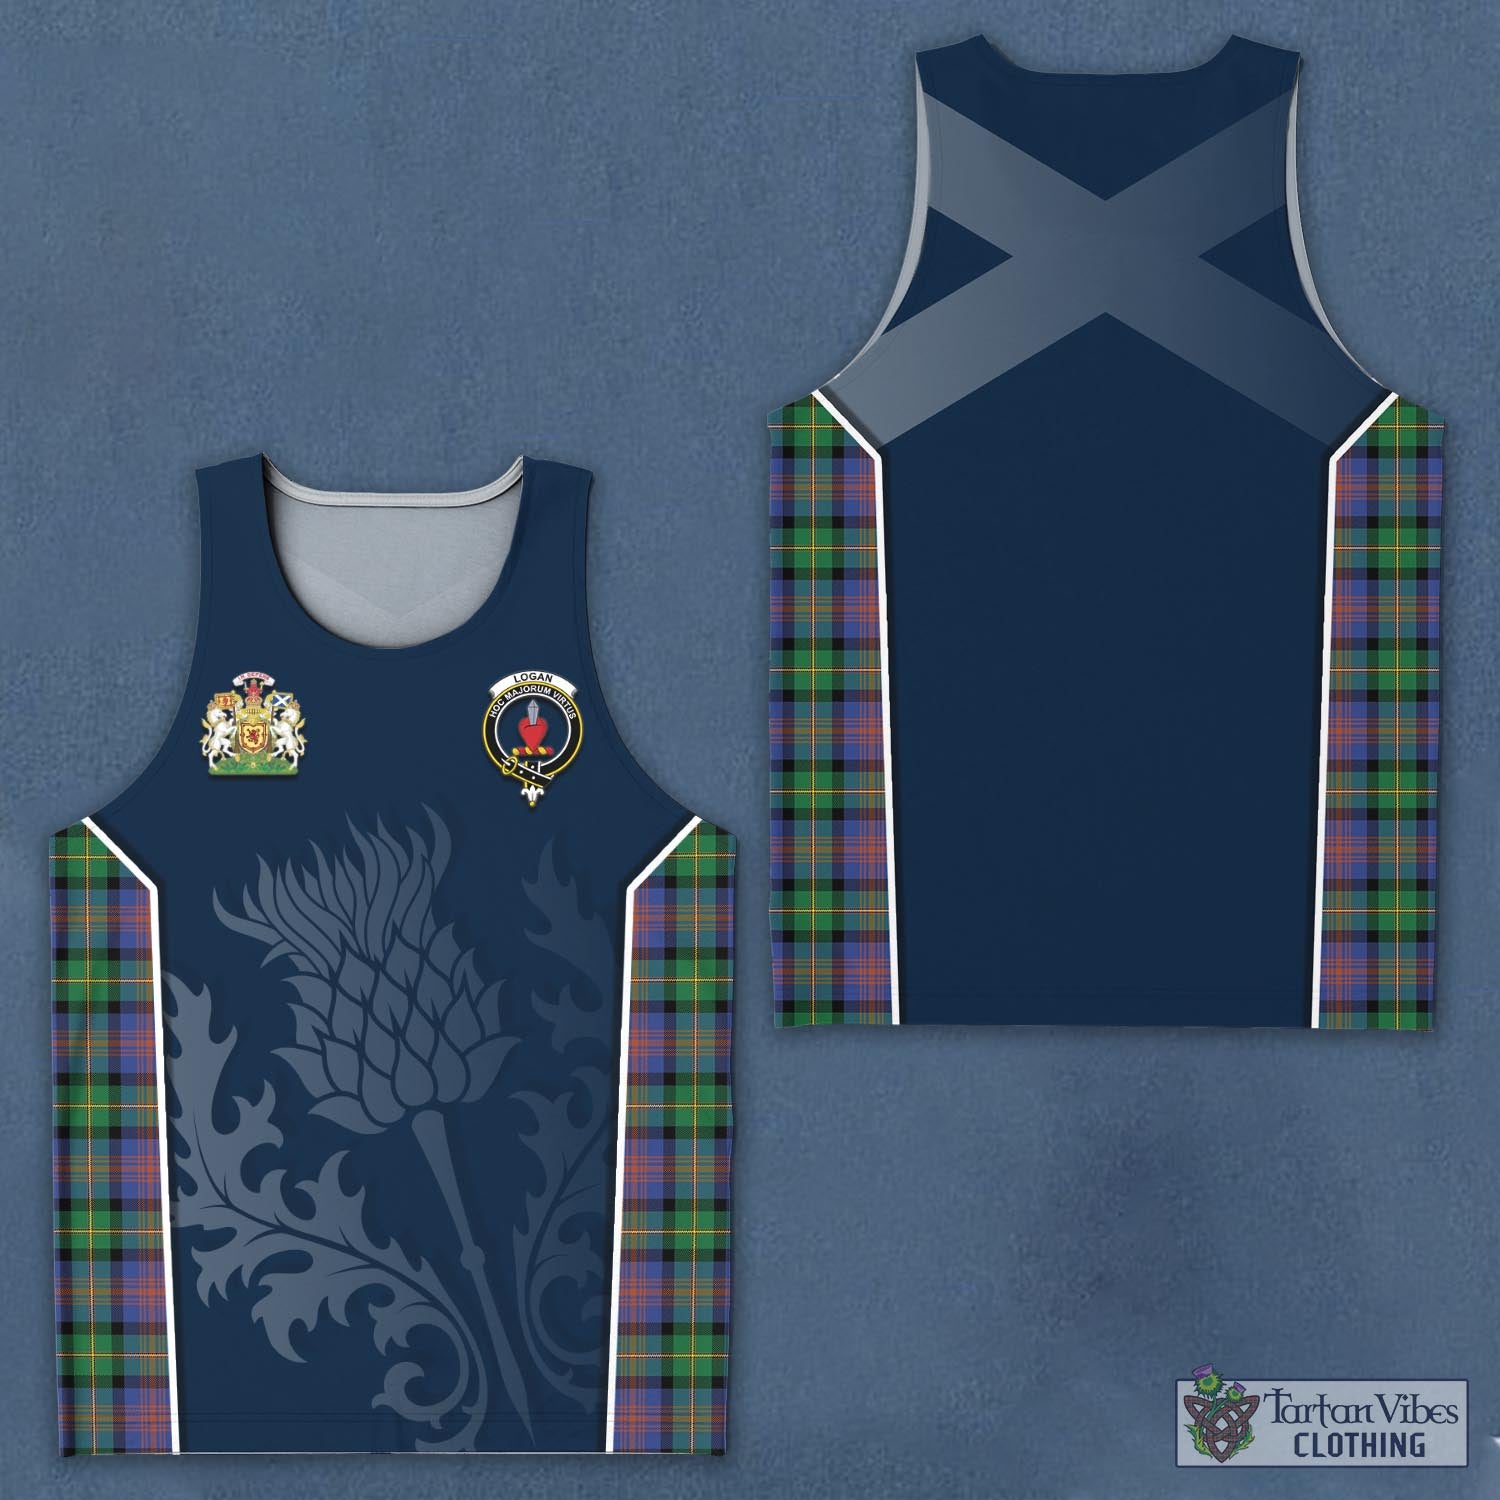 Tartan Vibes Clothing Logan Ancient Tartan Men's Tanks Top with Family Crest and Scottish Thistle Vibes Sport Style